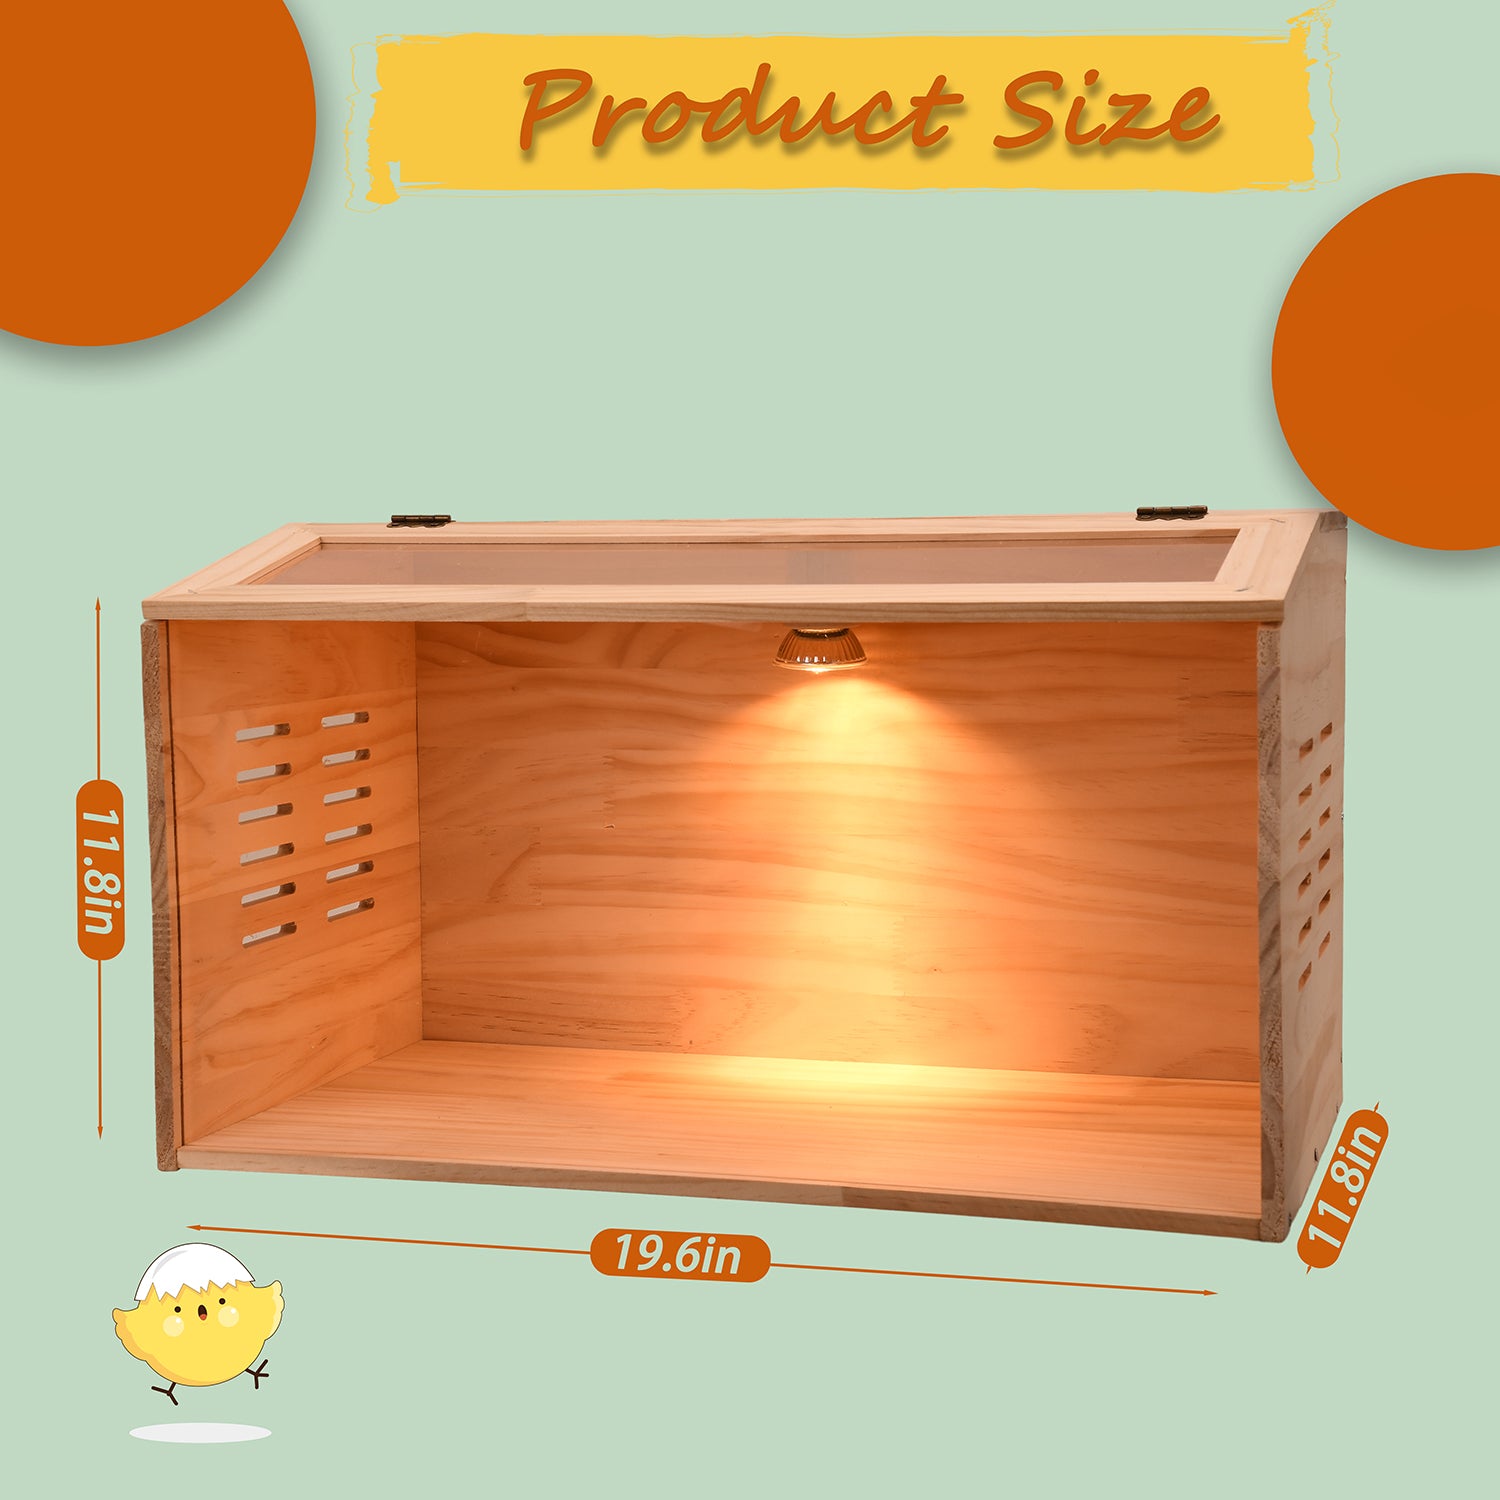 chick brooder box. 5-12 chicken brooder heater. pine wood material. poultry brooder box with heater